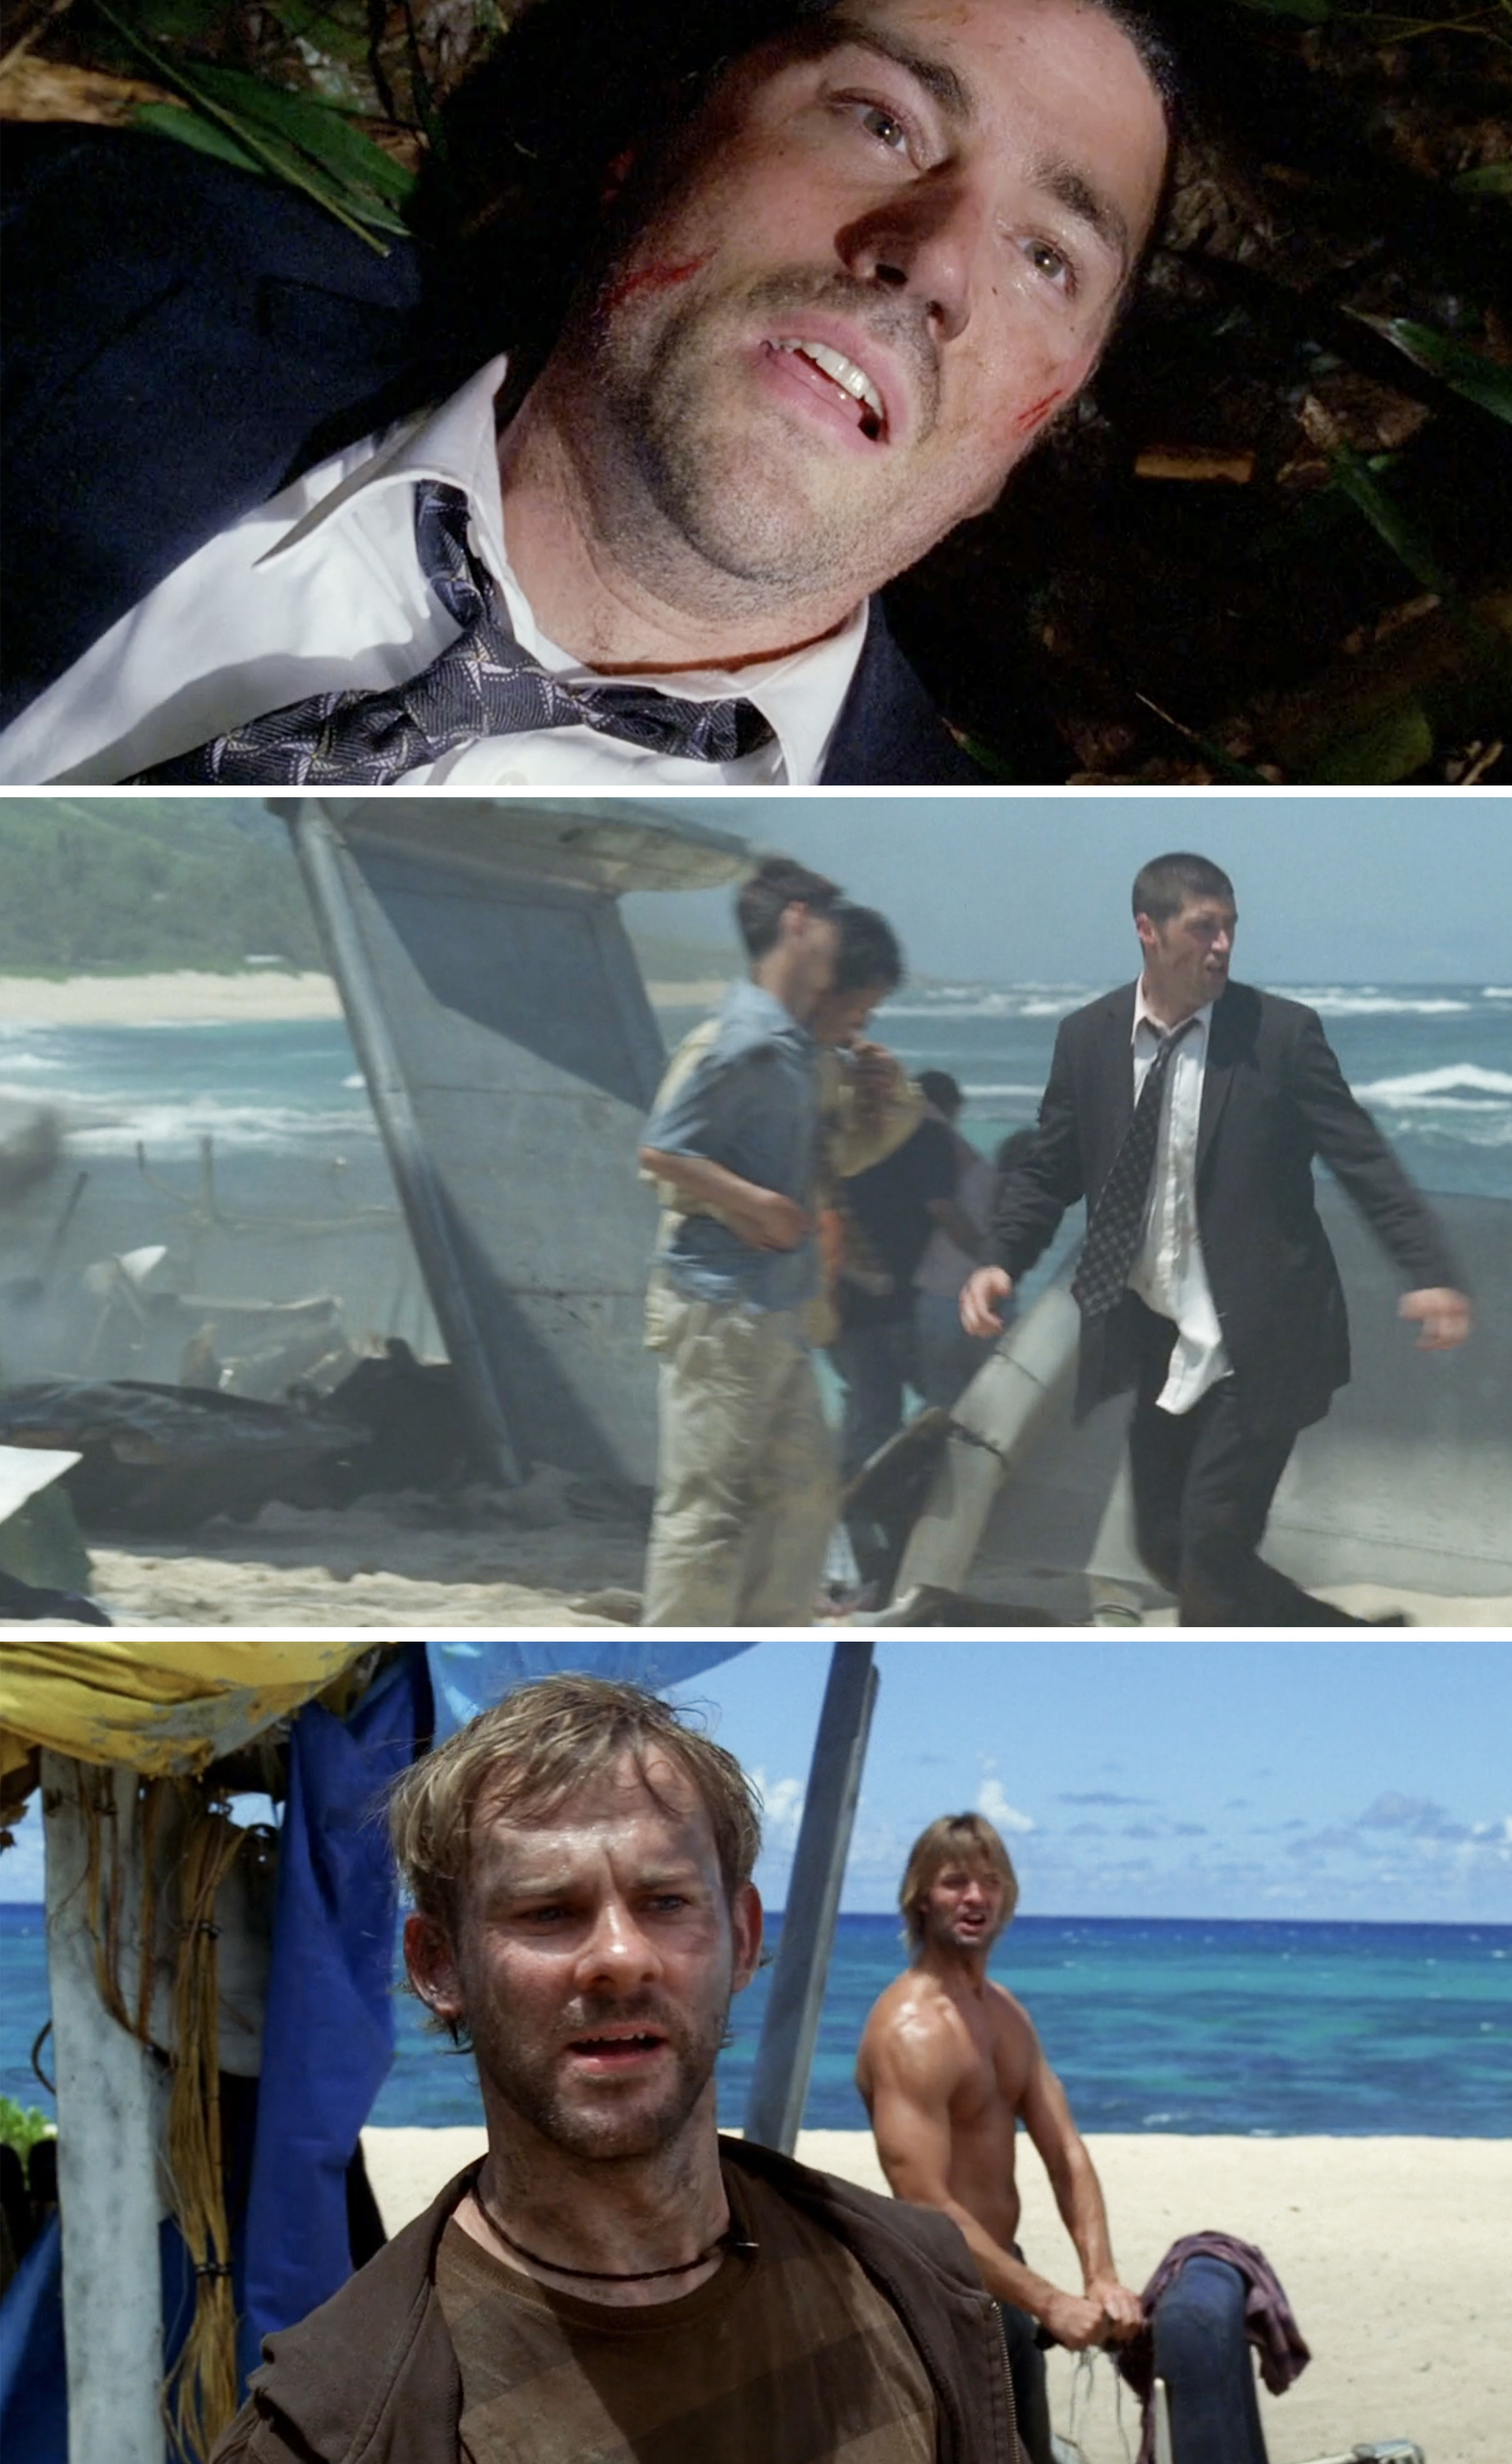 Scenes from Lost